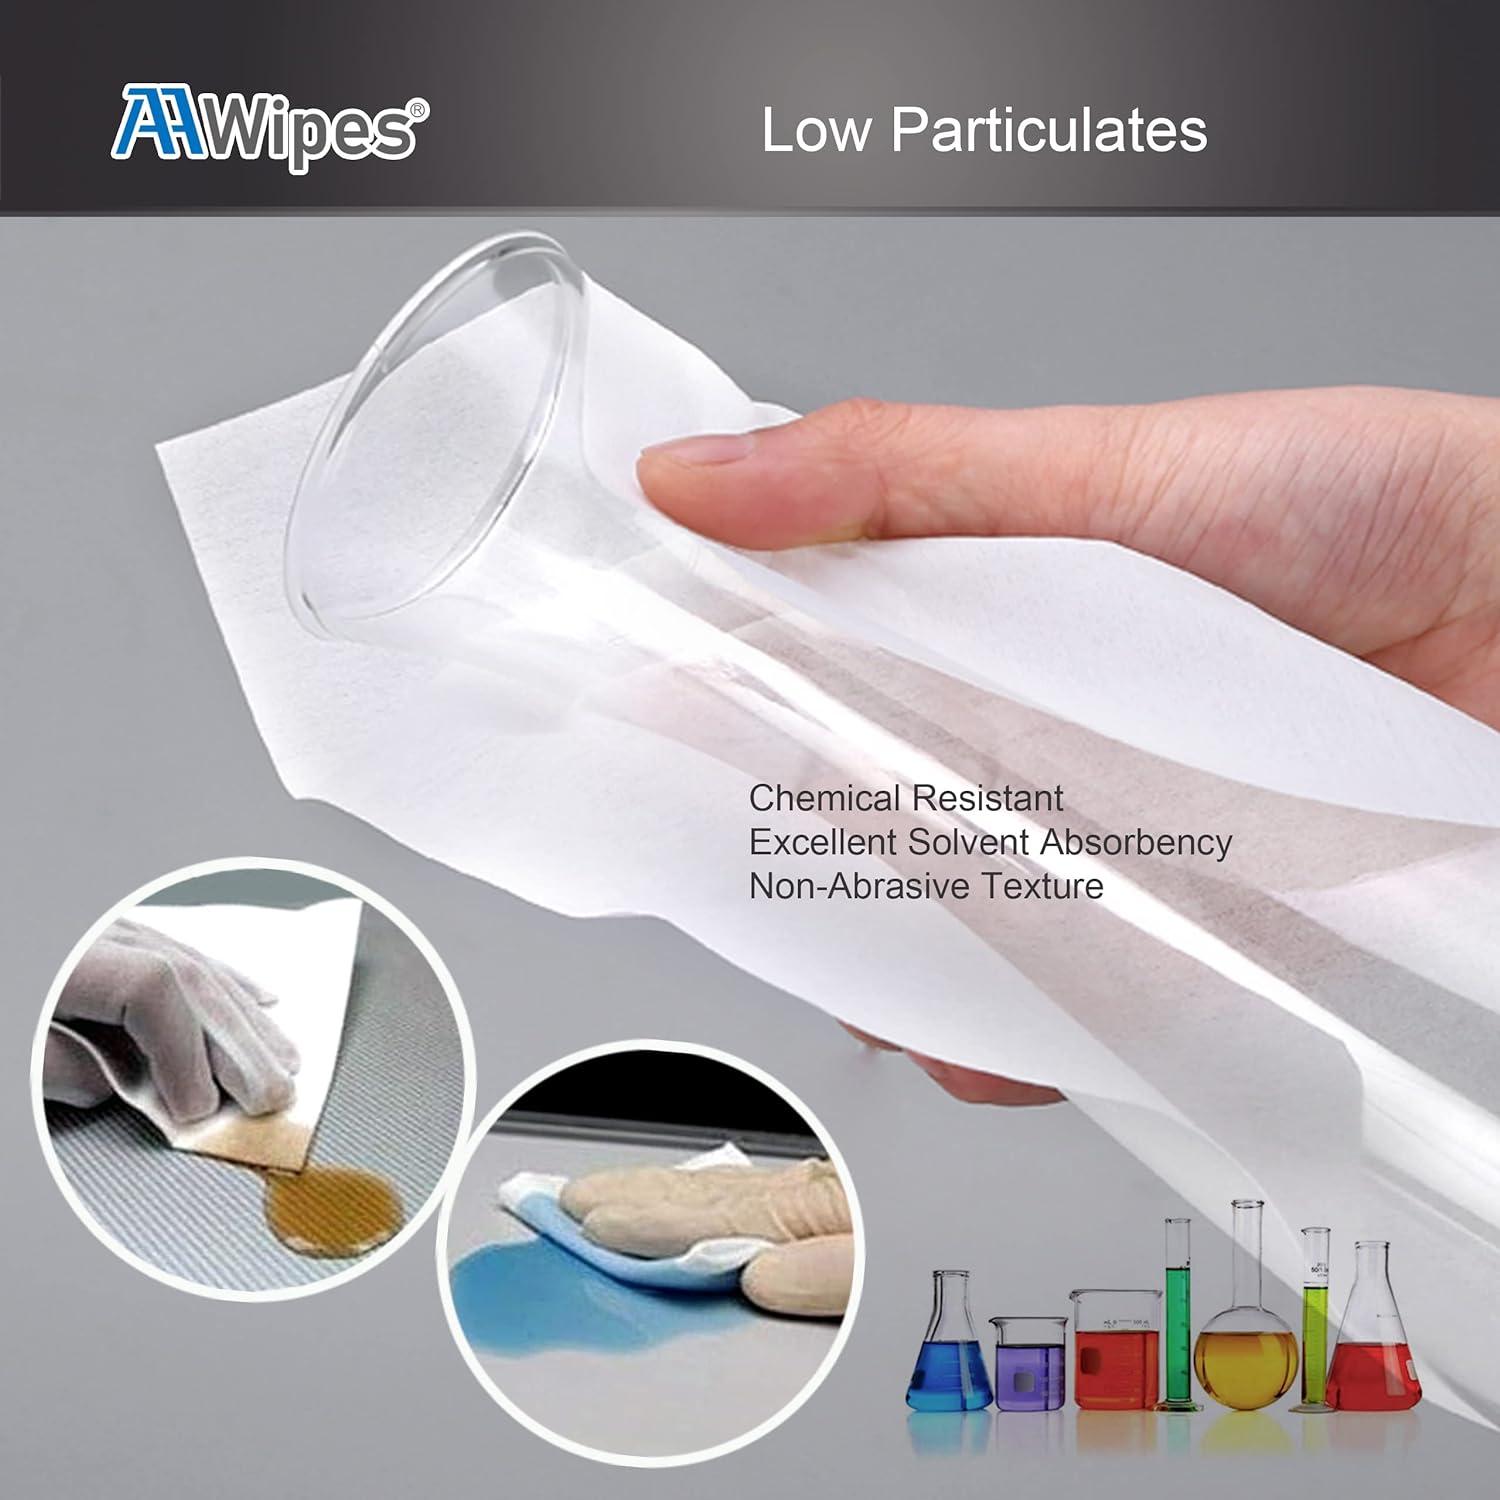 Cleanroom Heavy Duty Nonwoven Wipes: 12"x12" Cellulose/Polyester Wiping Cloth for Lab, Electronics, Pharmaceutical, Printing and Semiconductor Industries. 3,000 wipes/box in 20 bags (No. NW06812).